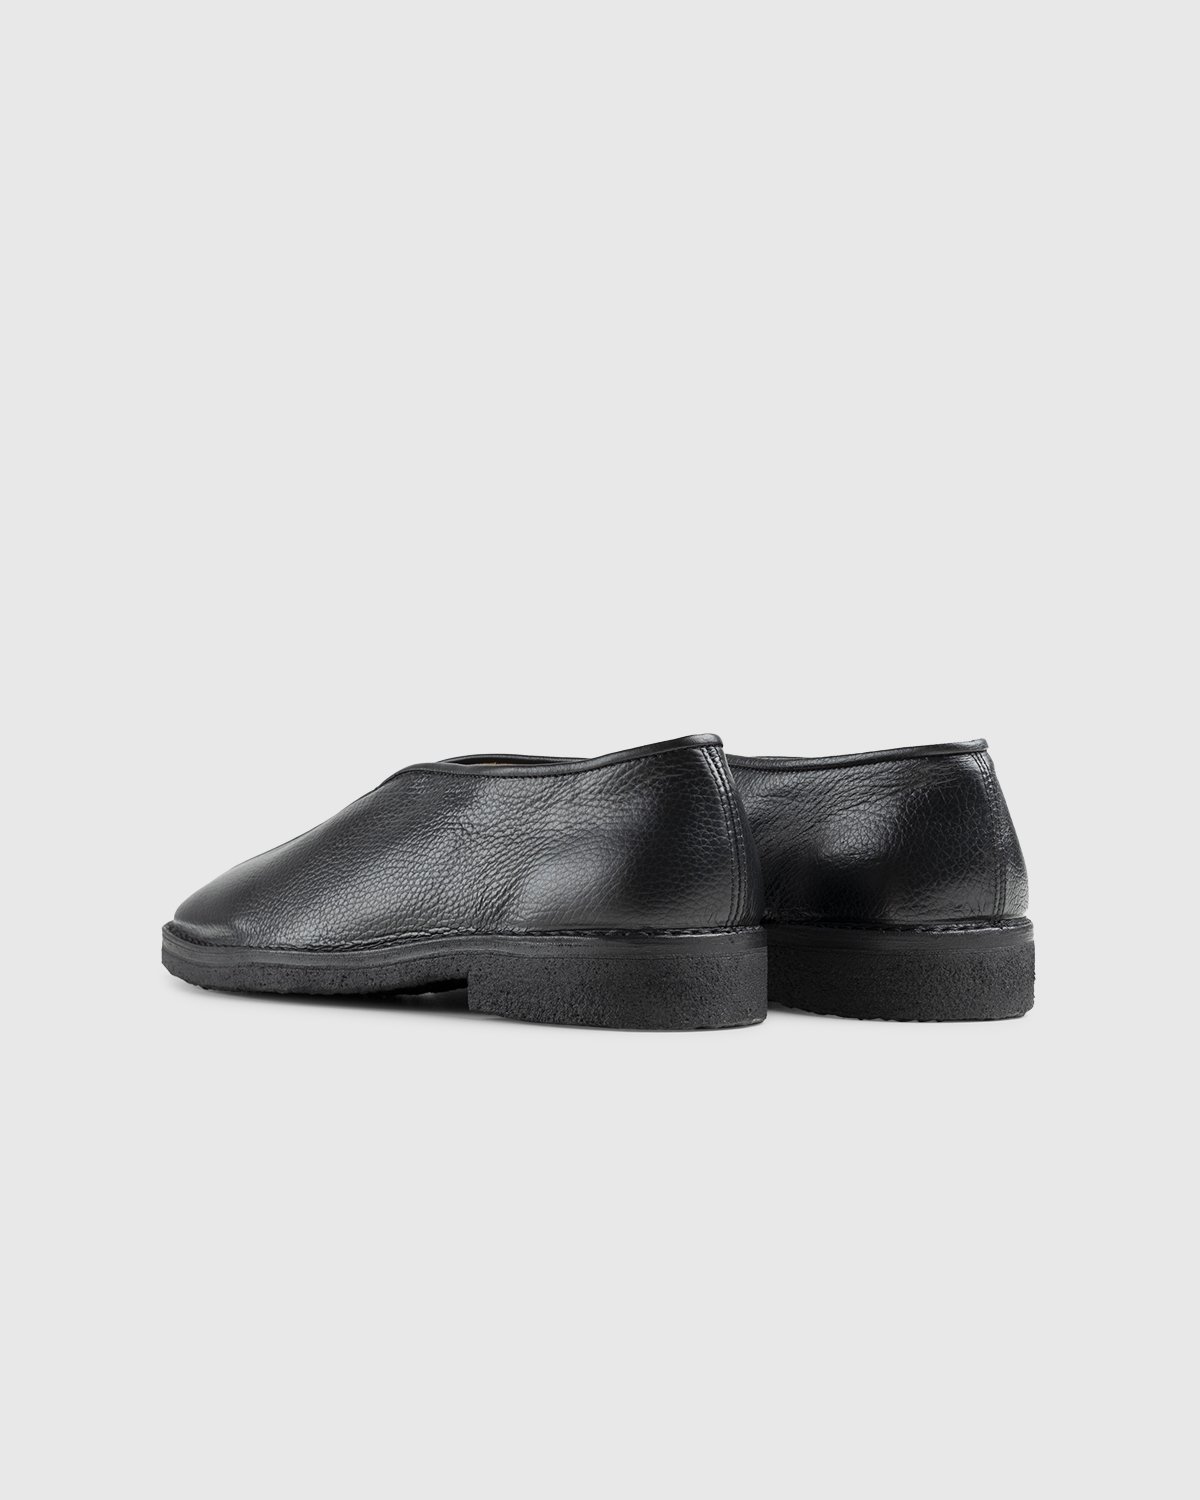 Lemaire - Leather Chinese Slippers Black - Footwear - Black - Image 5